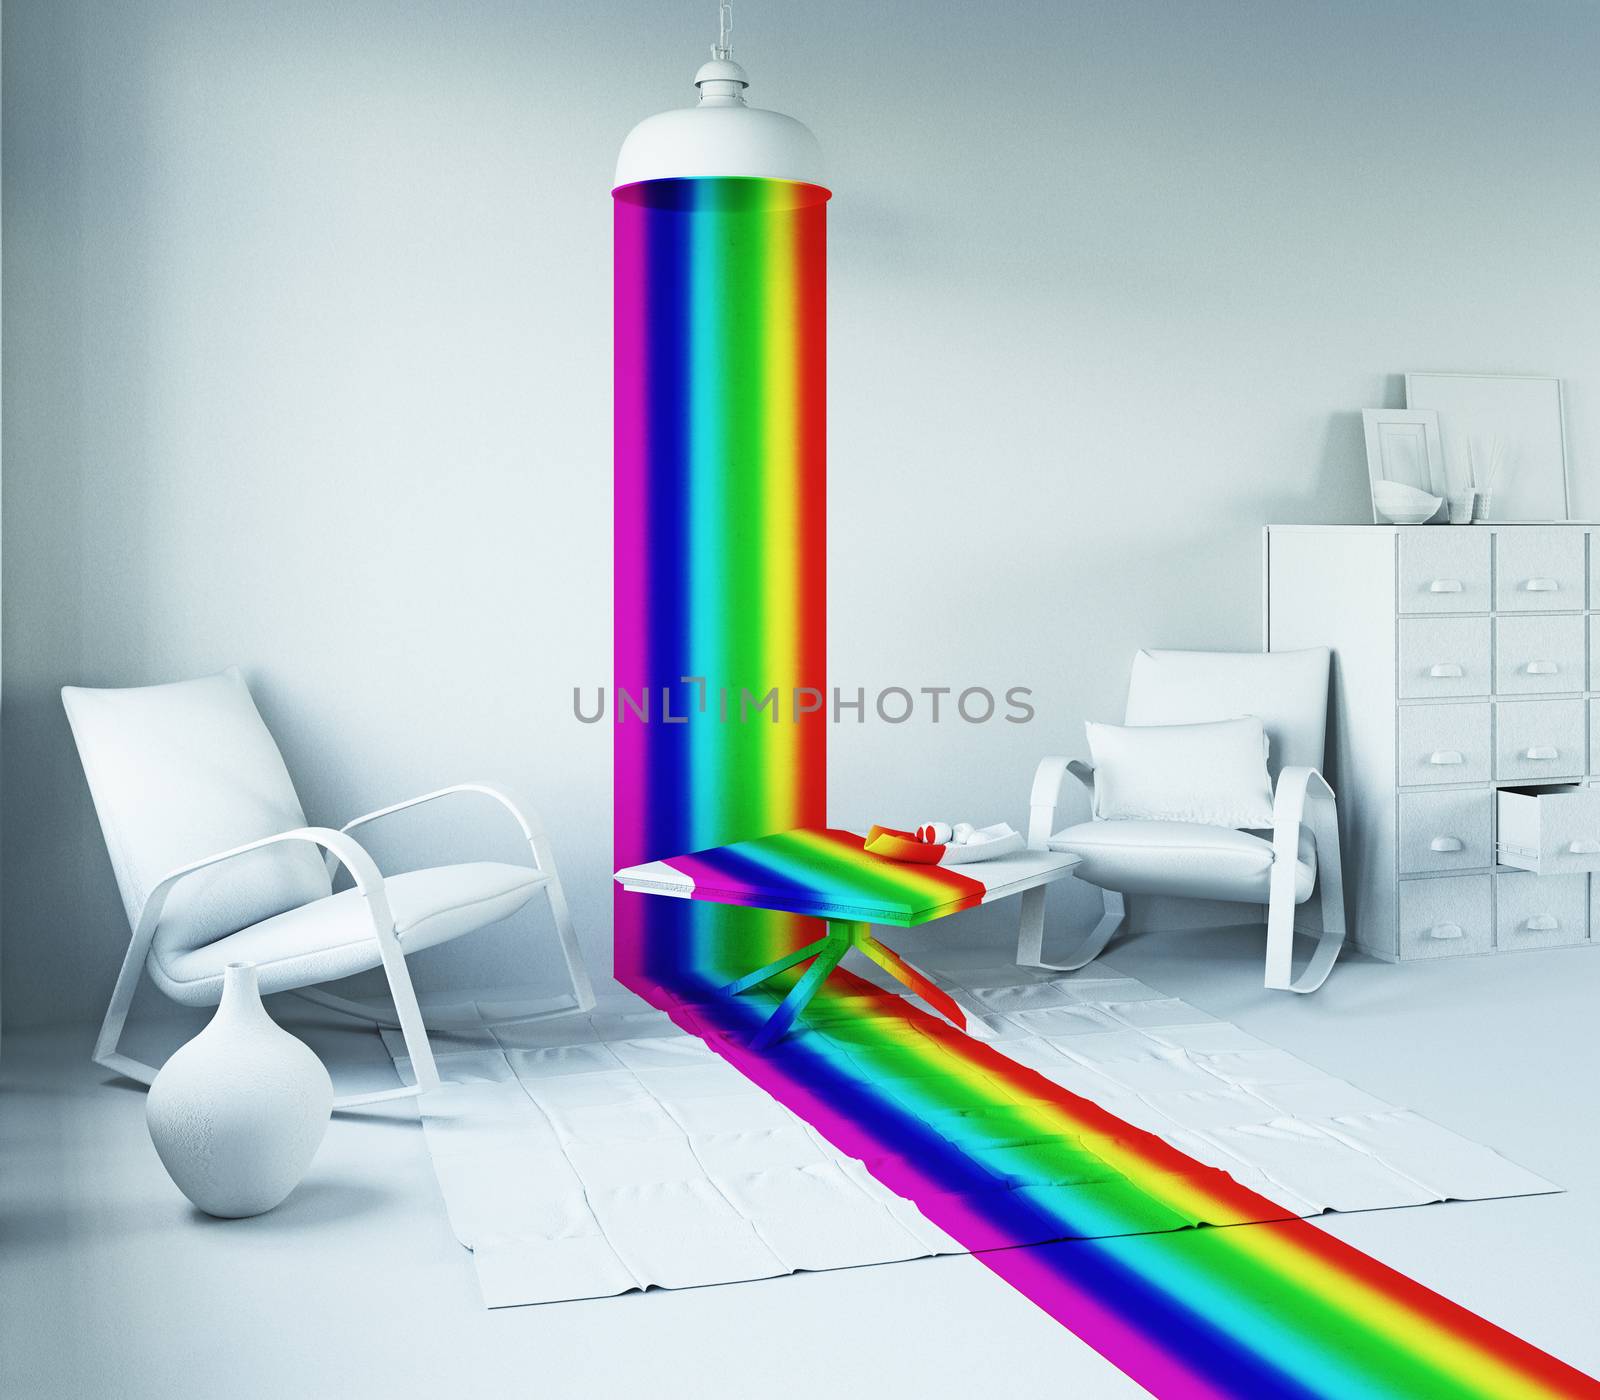 Rainbow color light from the lamp in a white interior. Art-style 3d concept